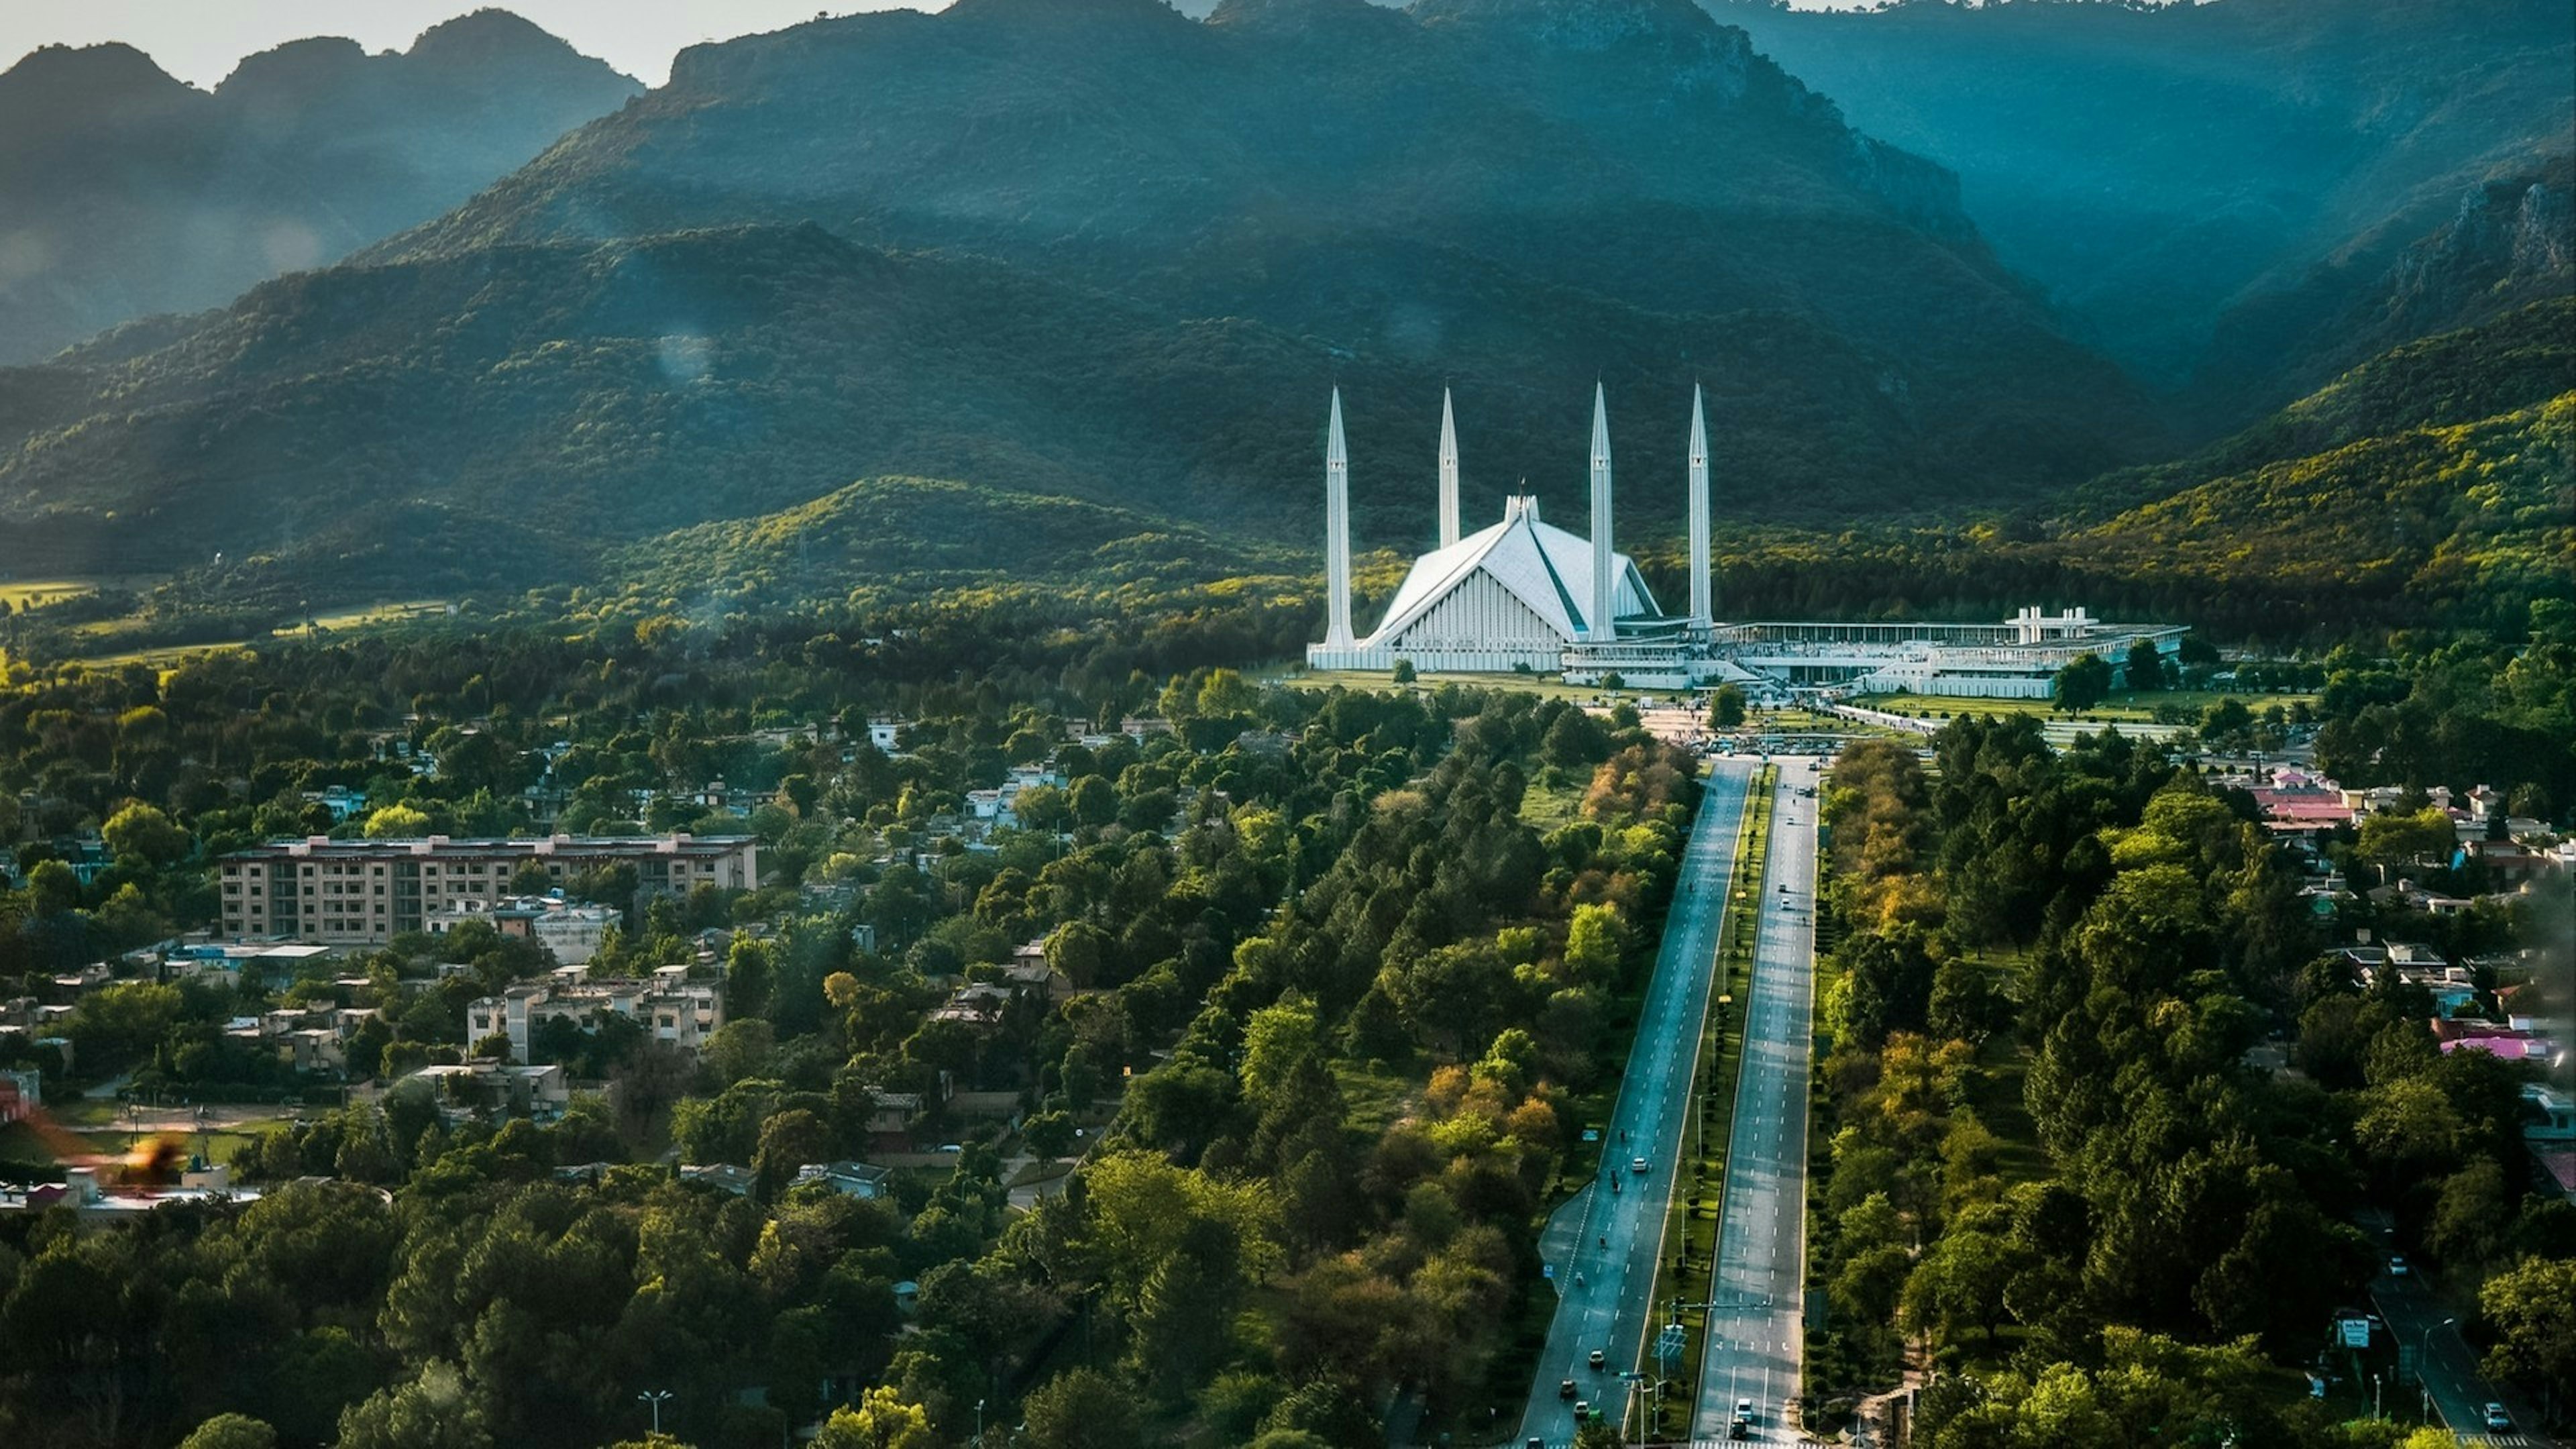 Aerial photo of Islamabad, the capital city of Pakistan showing the landmark Shah Faisal Mosque